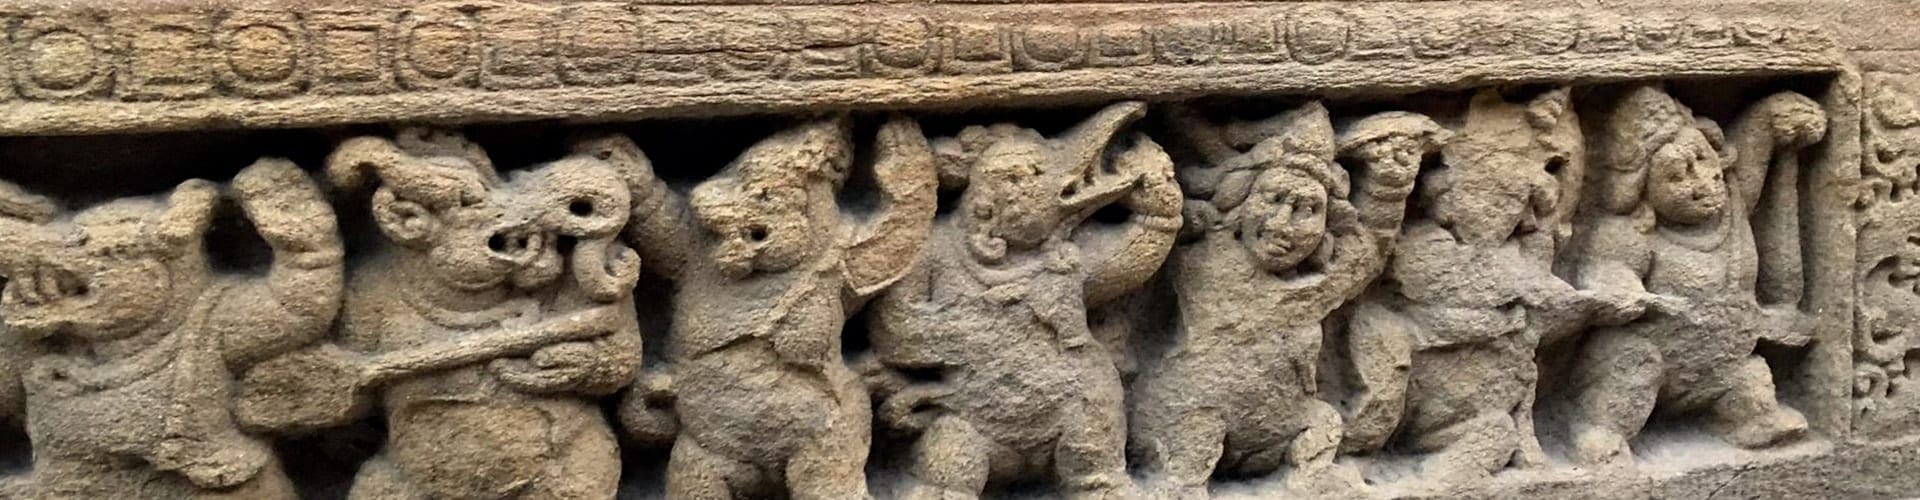 Kailasanatha Temple, Kanchipuram, Tamilnadu, India, detail of exterior relief with long-snouted demons and human figures, c. 700 CE